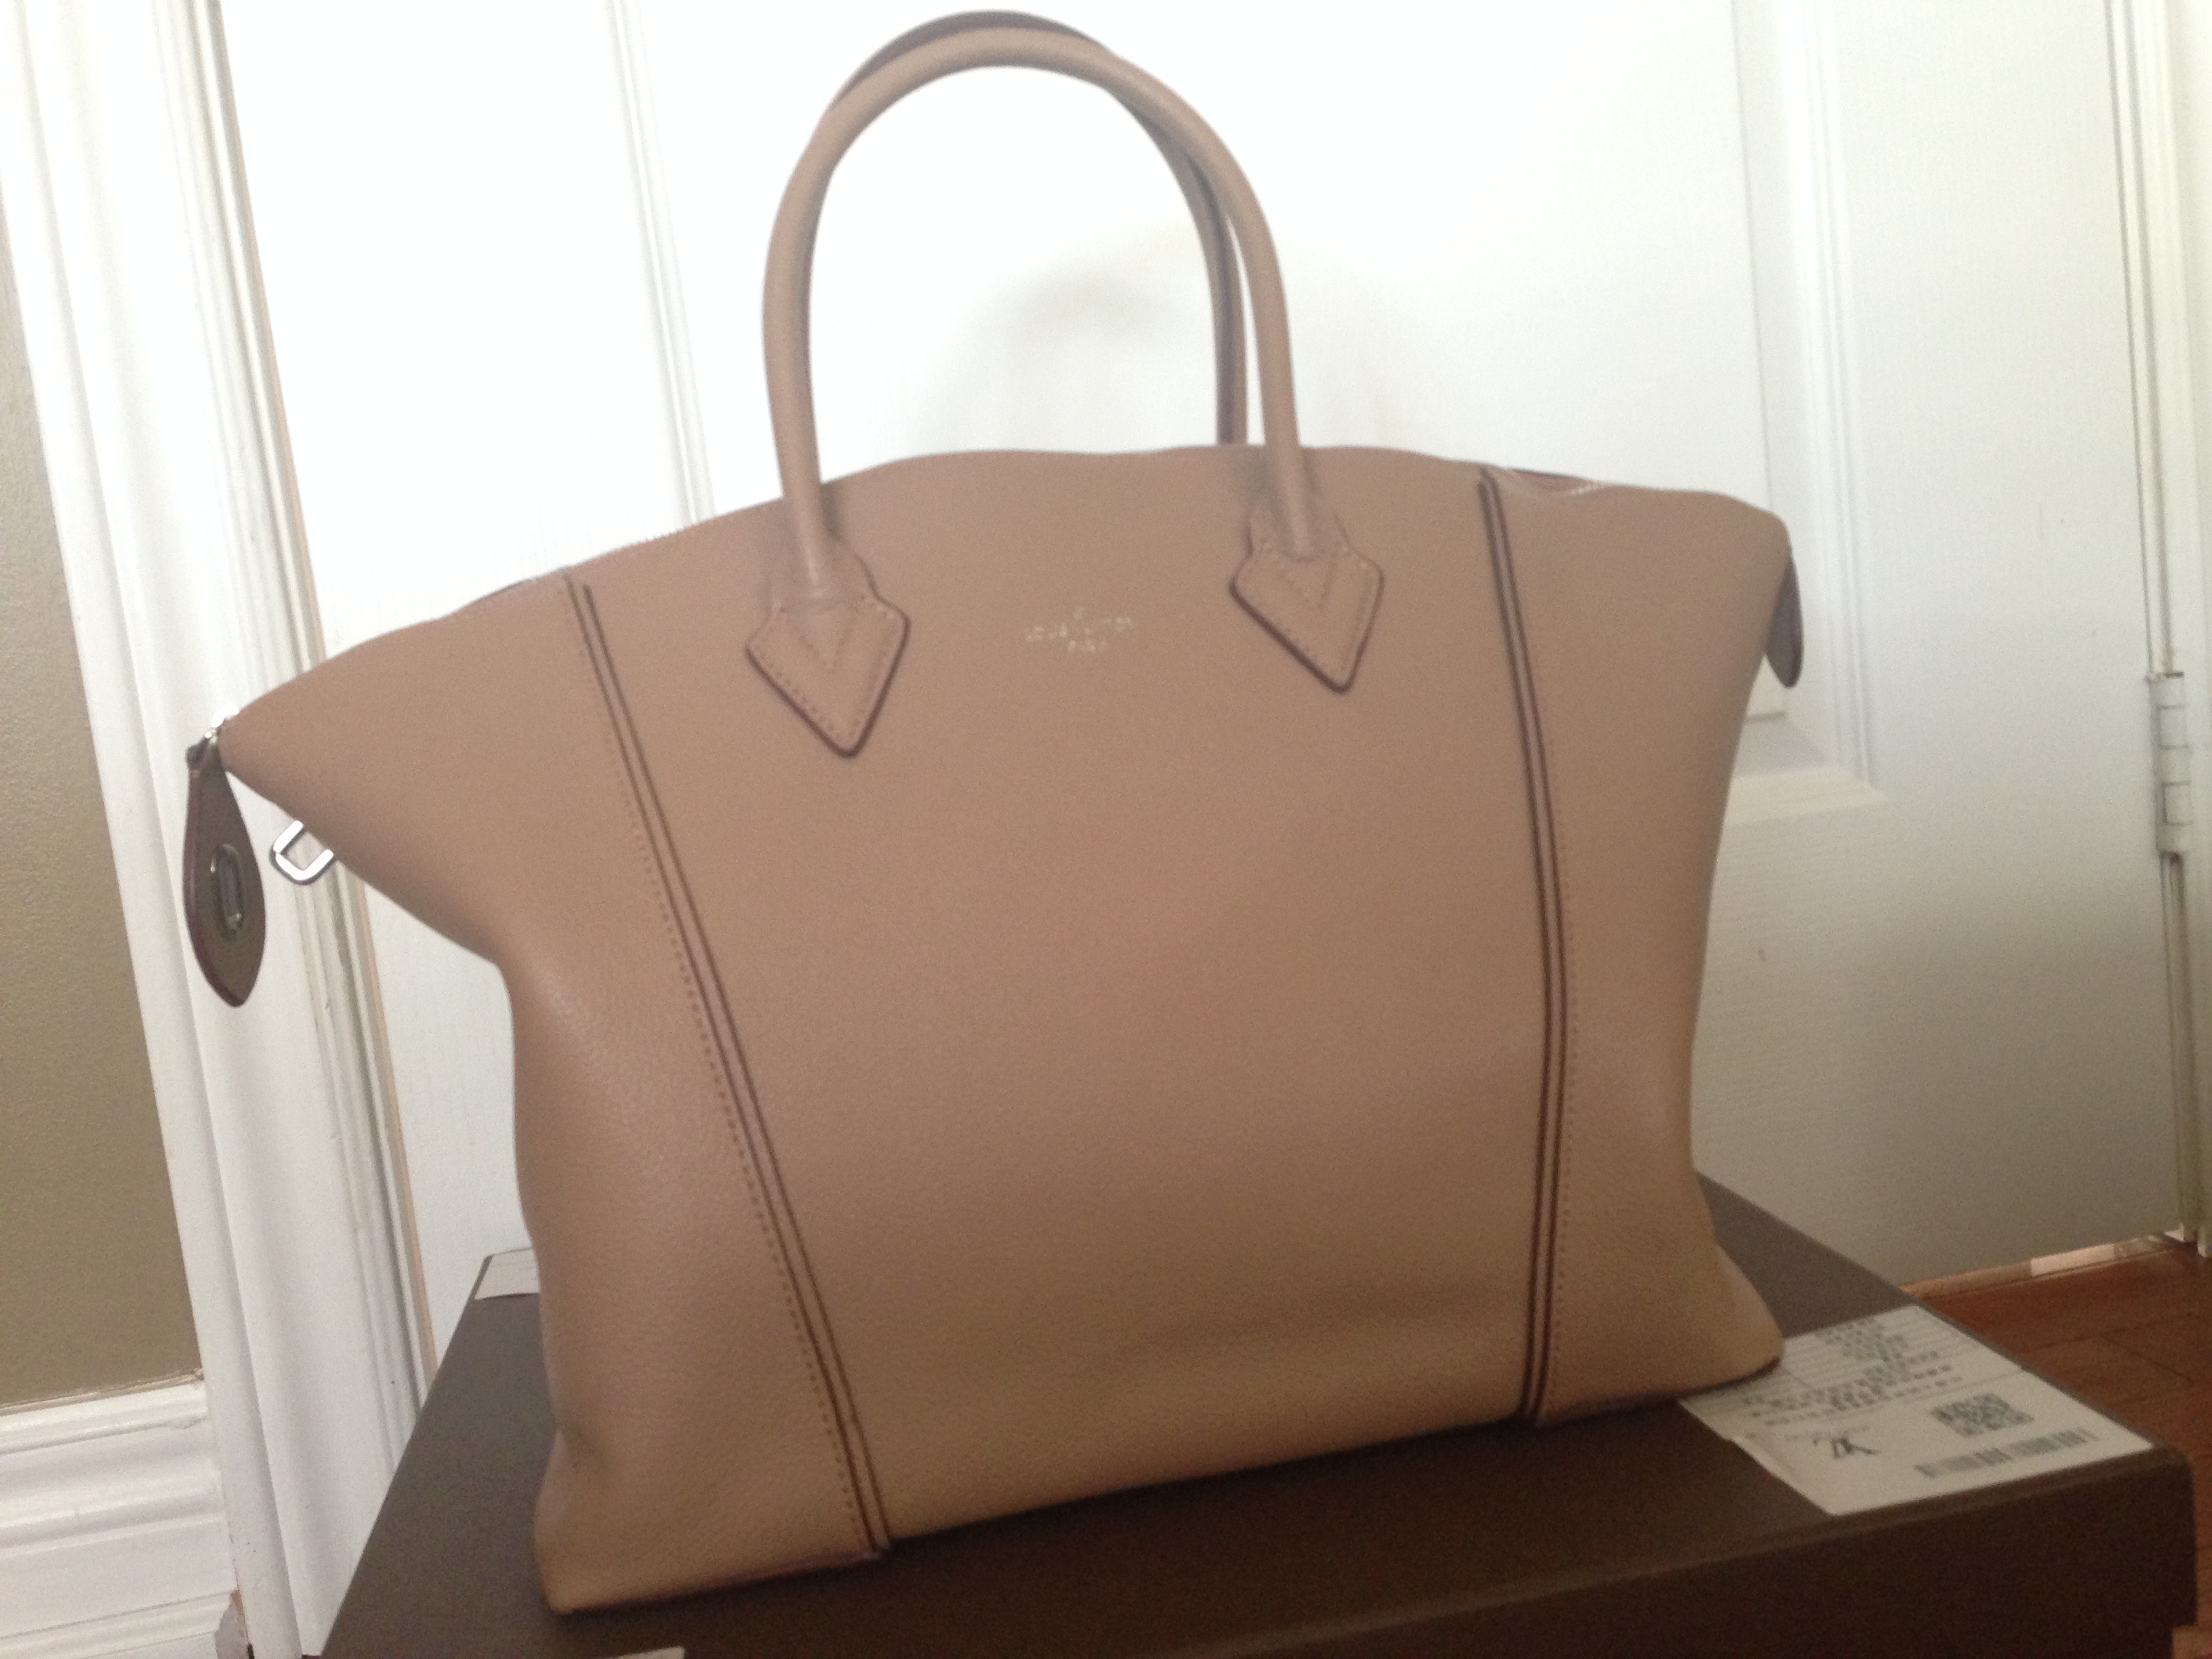 LV – Authentic & Replica Bags/Handbags Reviews by thepursequeen